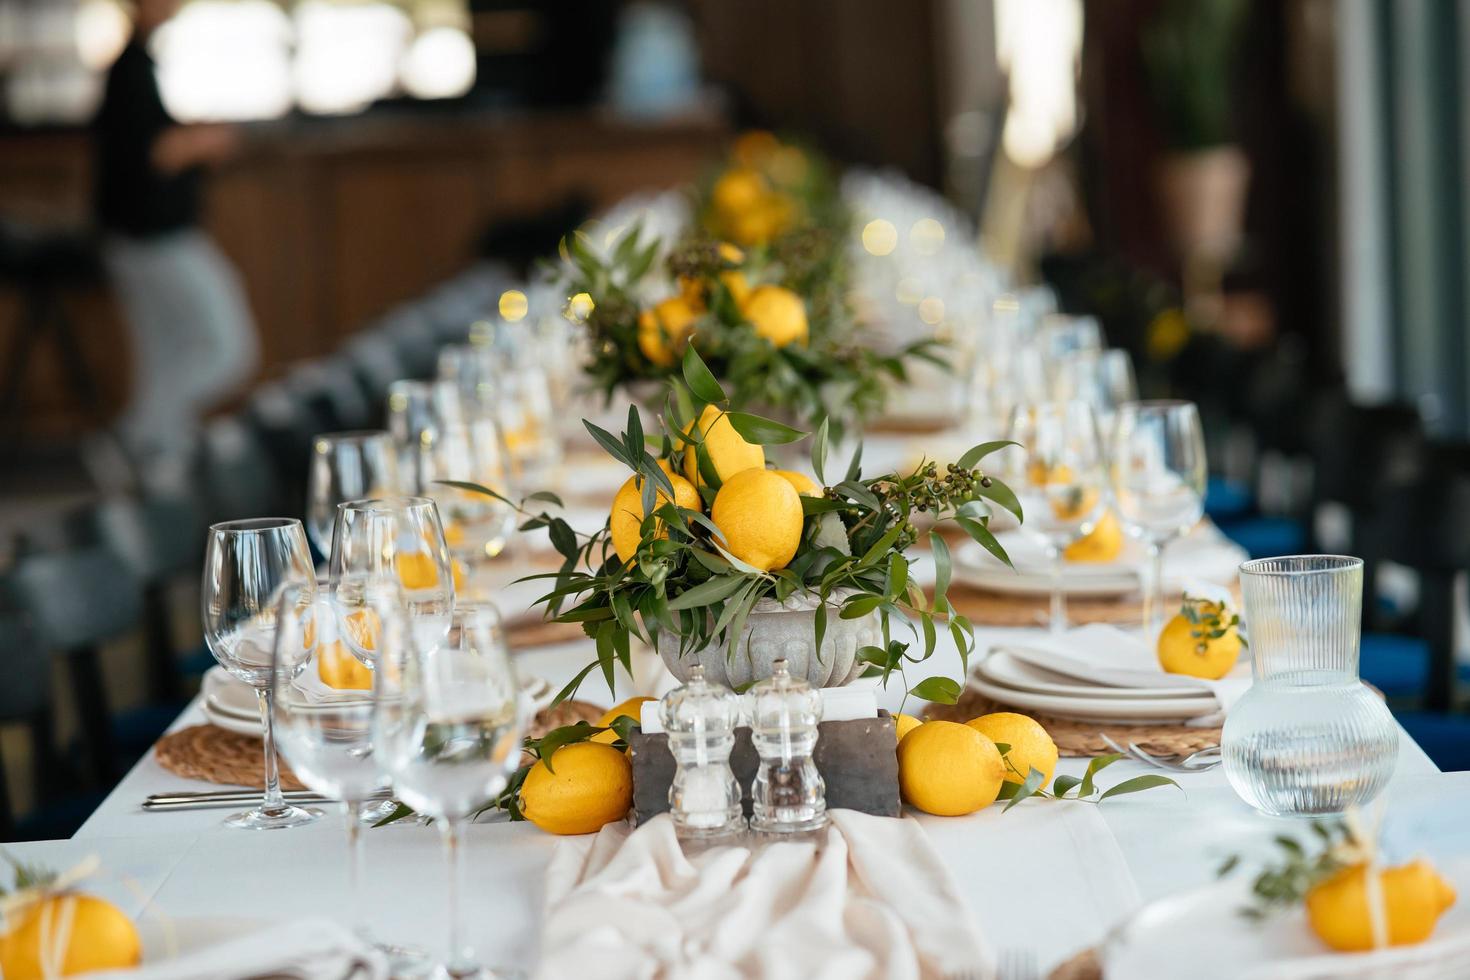 Festive table at the wedding party decorated with lemon arrangements photo